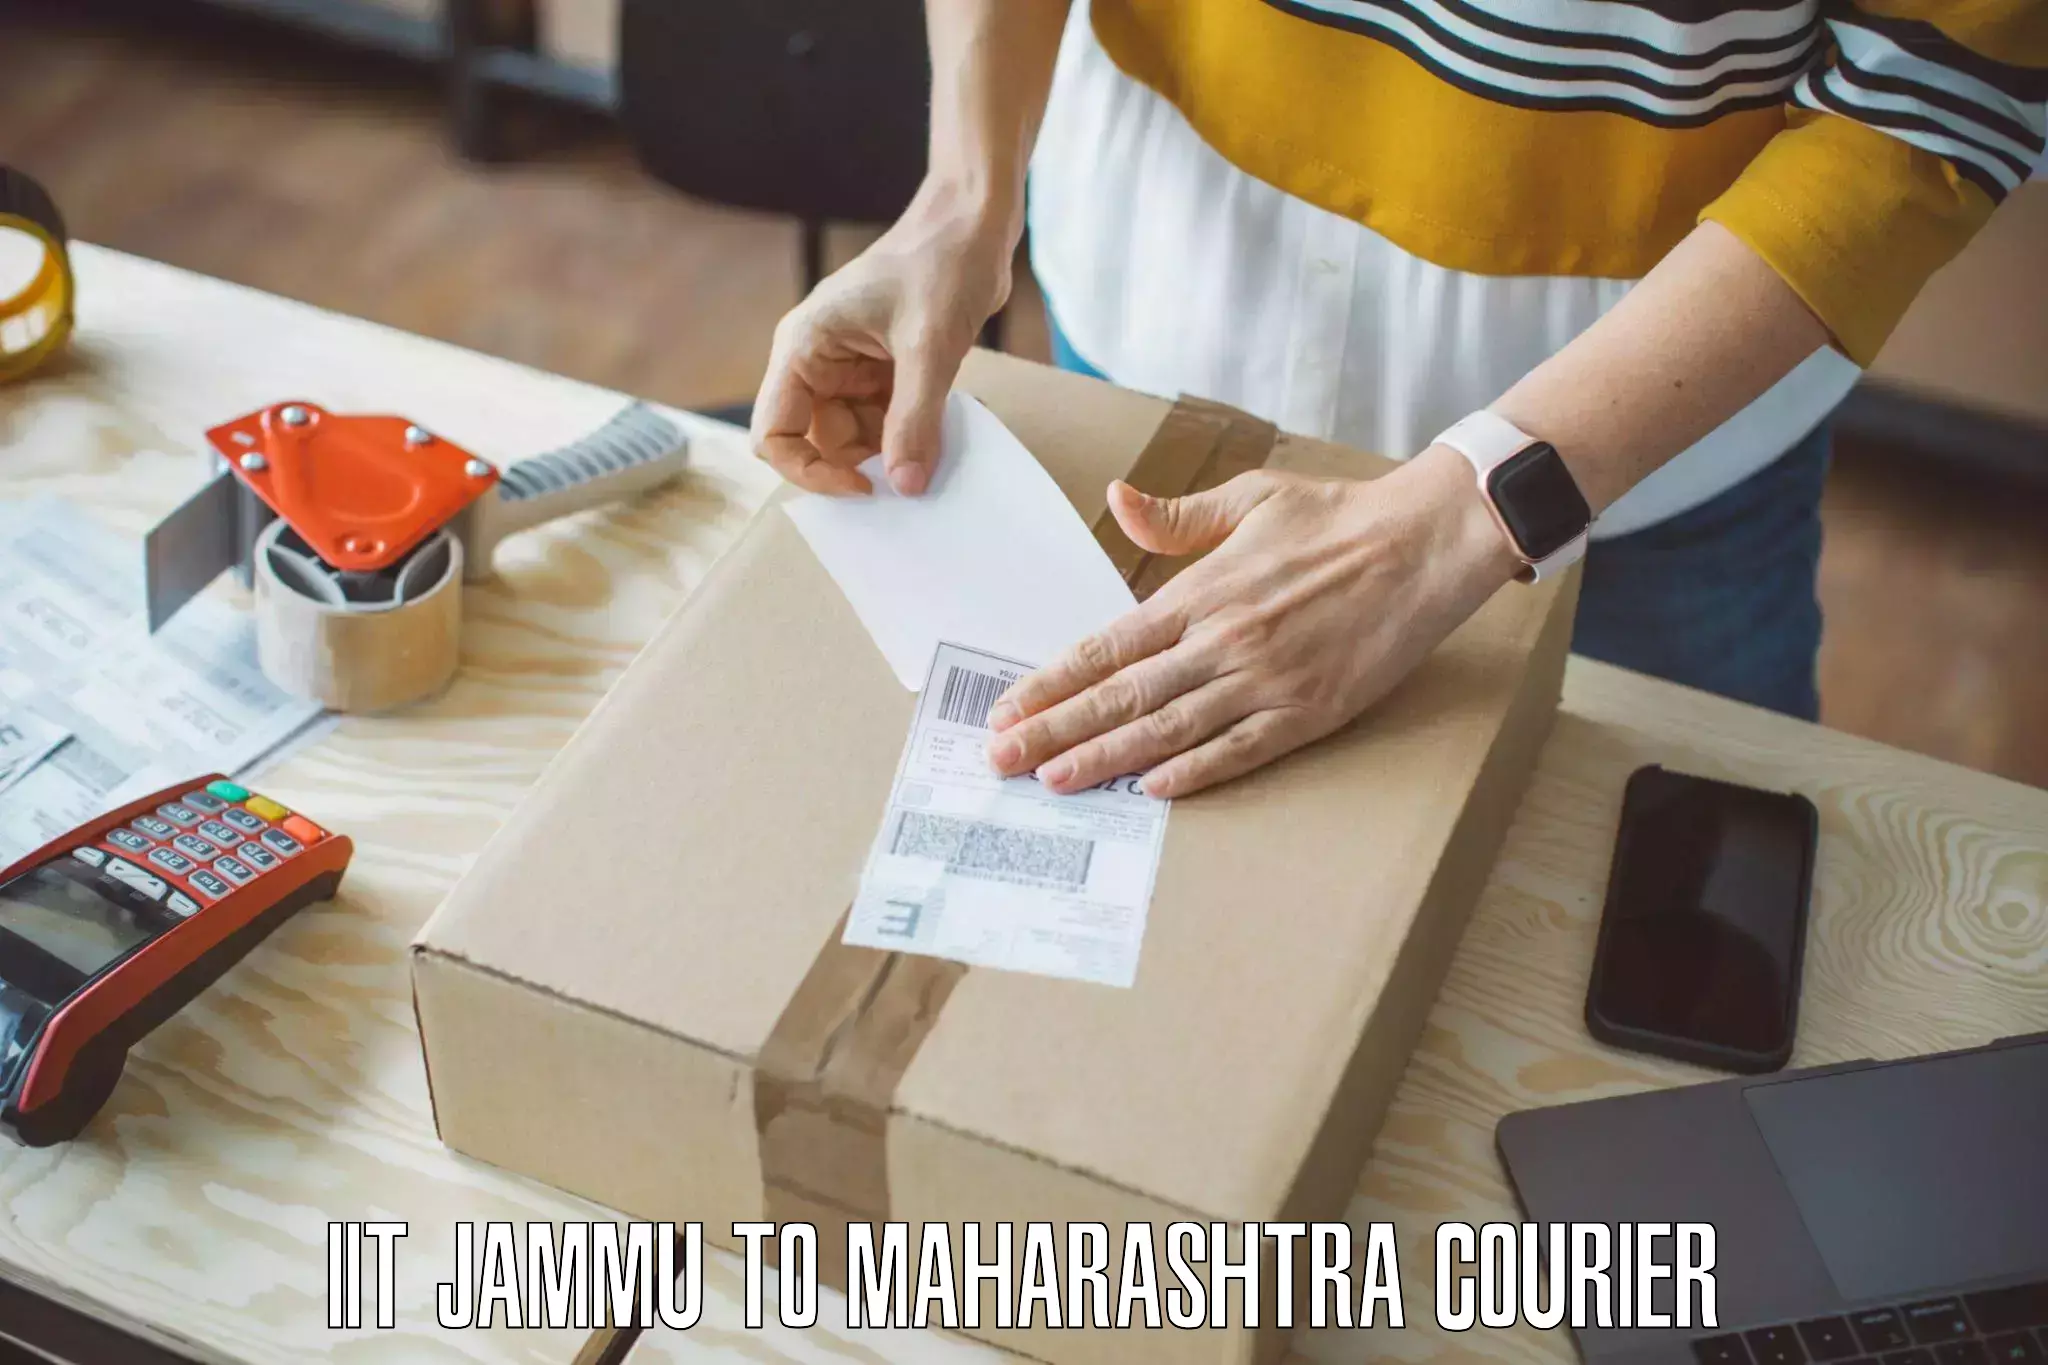 Moving and storage services in IIT Jammu to Gangakher